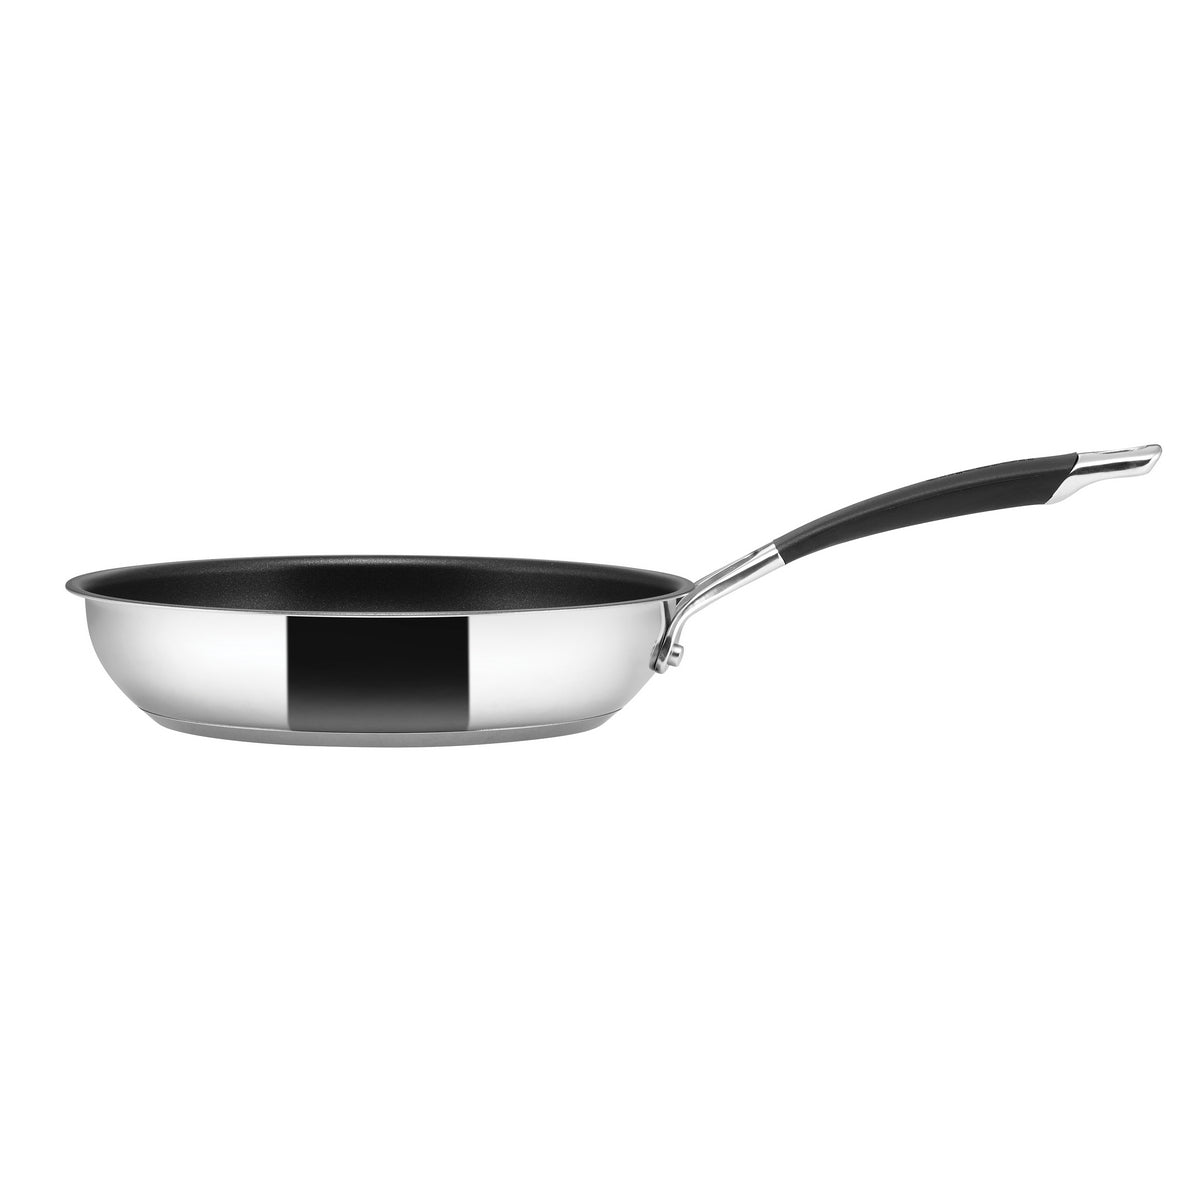 Momentum stainless steel frying pan is available in a variety of sizes including this large frying pan at 29cm